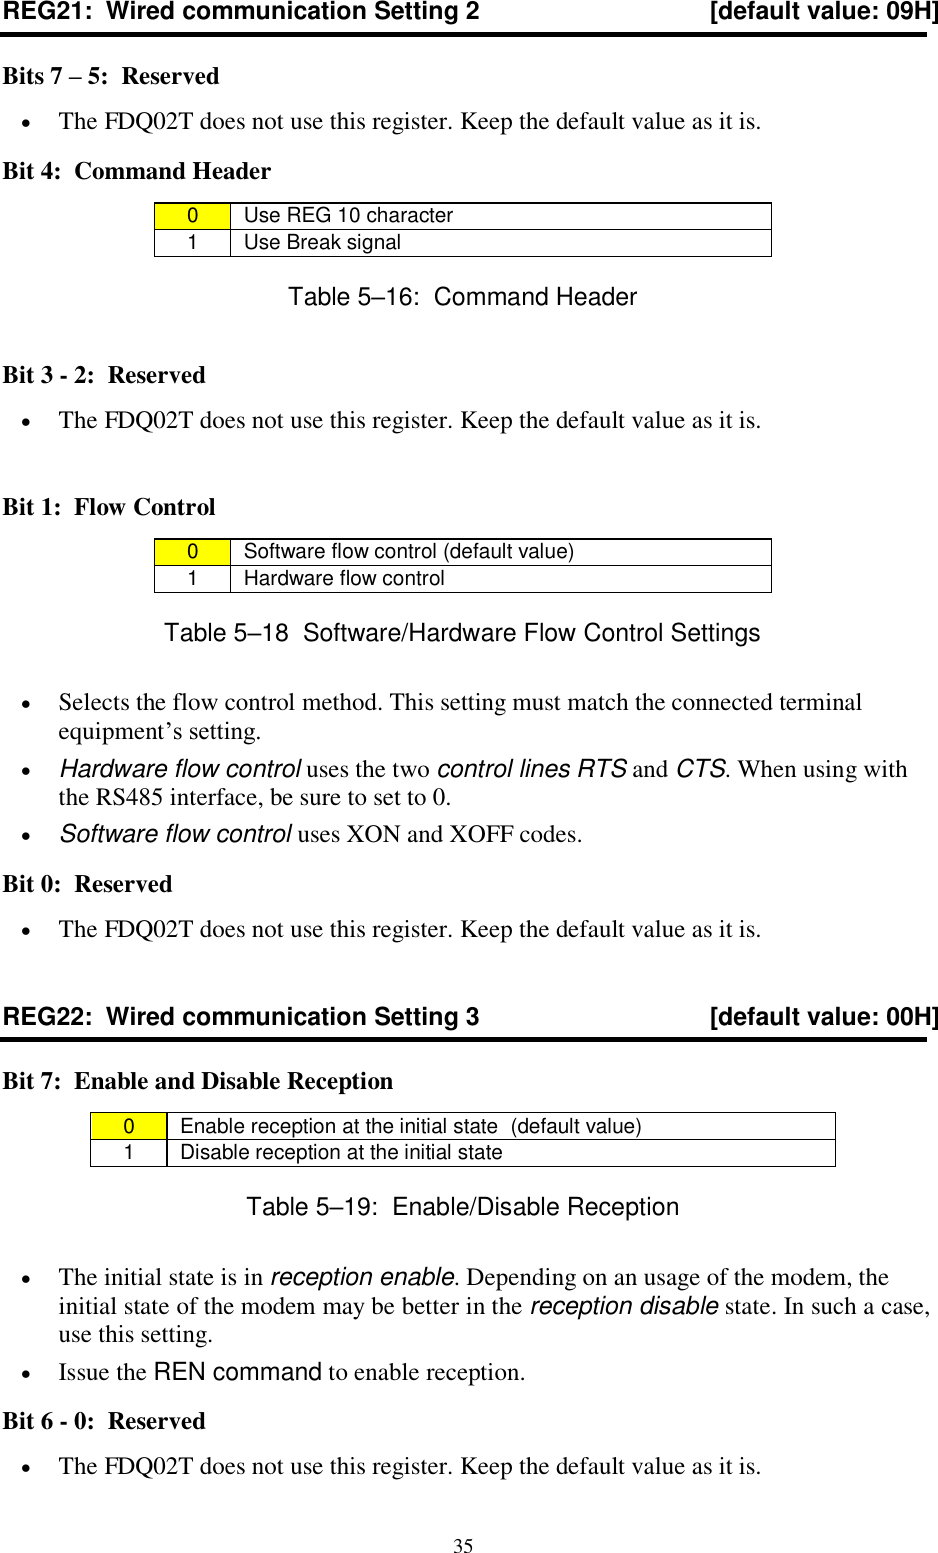  35 REG21:  Wired communication Setting 2  [default value: 09H] Bits 7 – 5:  Reserved  The FDQ02T does not use this register. Keep the default value as it is. Bit 4:  Command Header 0  Use REG 10 character 1  Use Break signal Table 5–16:  Command Header Bit 3 - 2:  Reserved   The FDQ02T does not use this register. Keep the default value as it is.  Bit 1:  Flow Control 0  Software flow control (default value) 1  Hardware flow control Table 5–18  Software/Hardware Flow Control Settings  Selects the flow control method. This setting must match the connected terminal equipment’s setting.  Hardware flow control uses the two control lines RTS and CTS. When using with the RS485 interface, be sure to set to 0.  Software flow control uses XON and XOFF codes. Bit 0:  Reserved   The FDQ02T does not use this register. Keep the default value as it is. REG22:  Wired communication Setting 3  [default value: 00H] Bit 7:  Enable and Disable Reception 0  Enable reception at the initial state  (default value) 1  Disable reception at the initial state  Table 5–19:  Enable/Disable Reception  The initial state is in reception enable. Depending on an usage of the modem, the initial state of the modem may be better in the reception disable state. In such a case, use this setting.  Issue the REN command to enable reception. Bit 6 - 0:  Reserved  The FDQ02T does not use this register. Keep the default value as it is. 